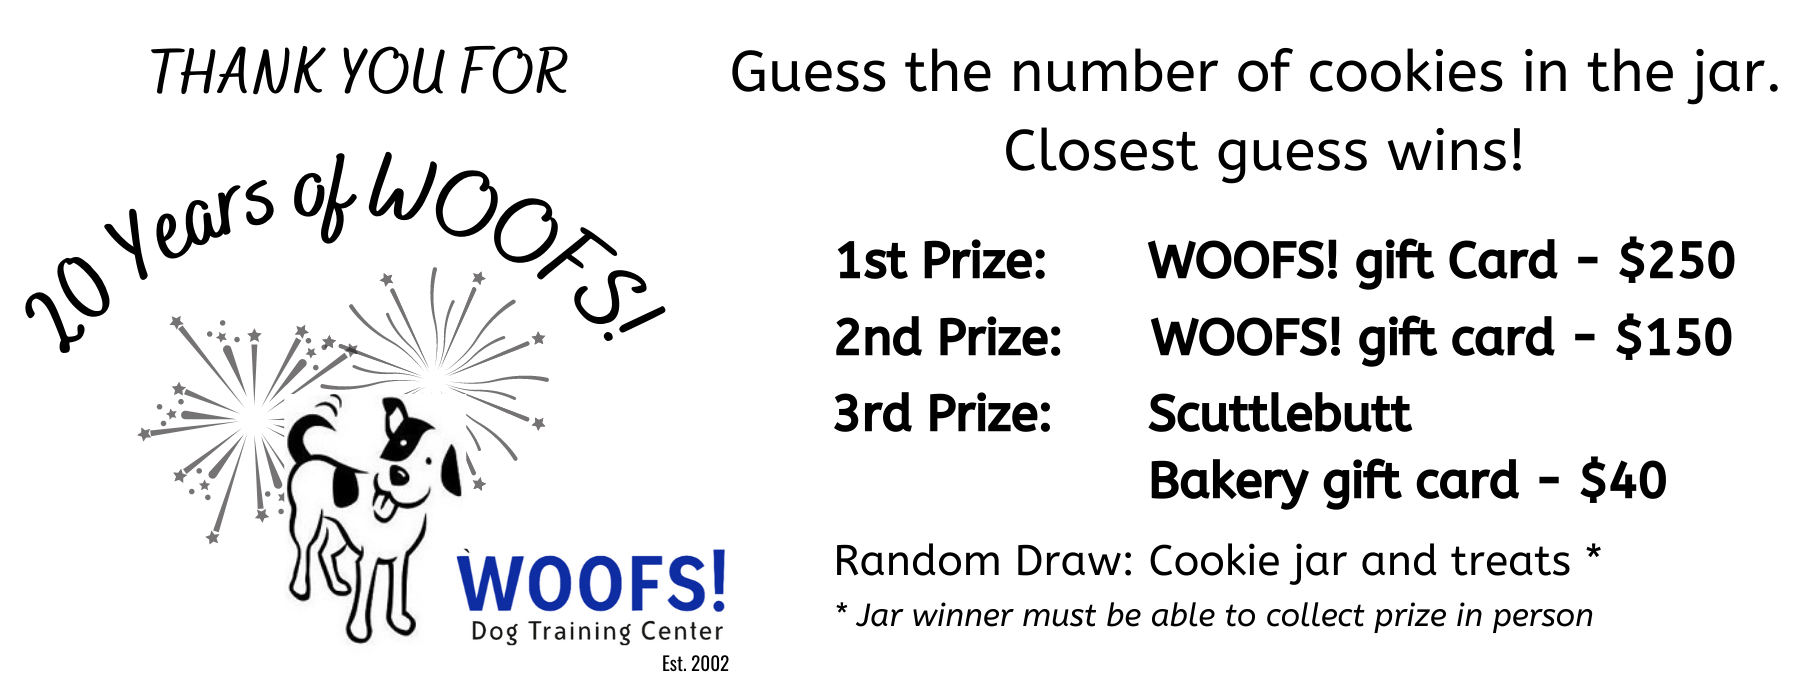 Guess the number of cookies in the jar and win! First prize: $250 WOOFS! gift card, Second prize: $150 WOOFS! gift card, Third prize: $40 Scuttlebutt Bakery gift card, Random draw: the treat jar and treats (must be able to collect in person)